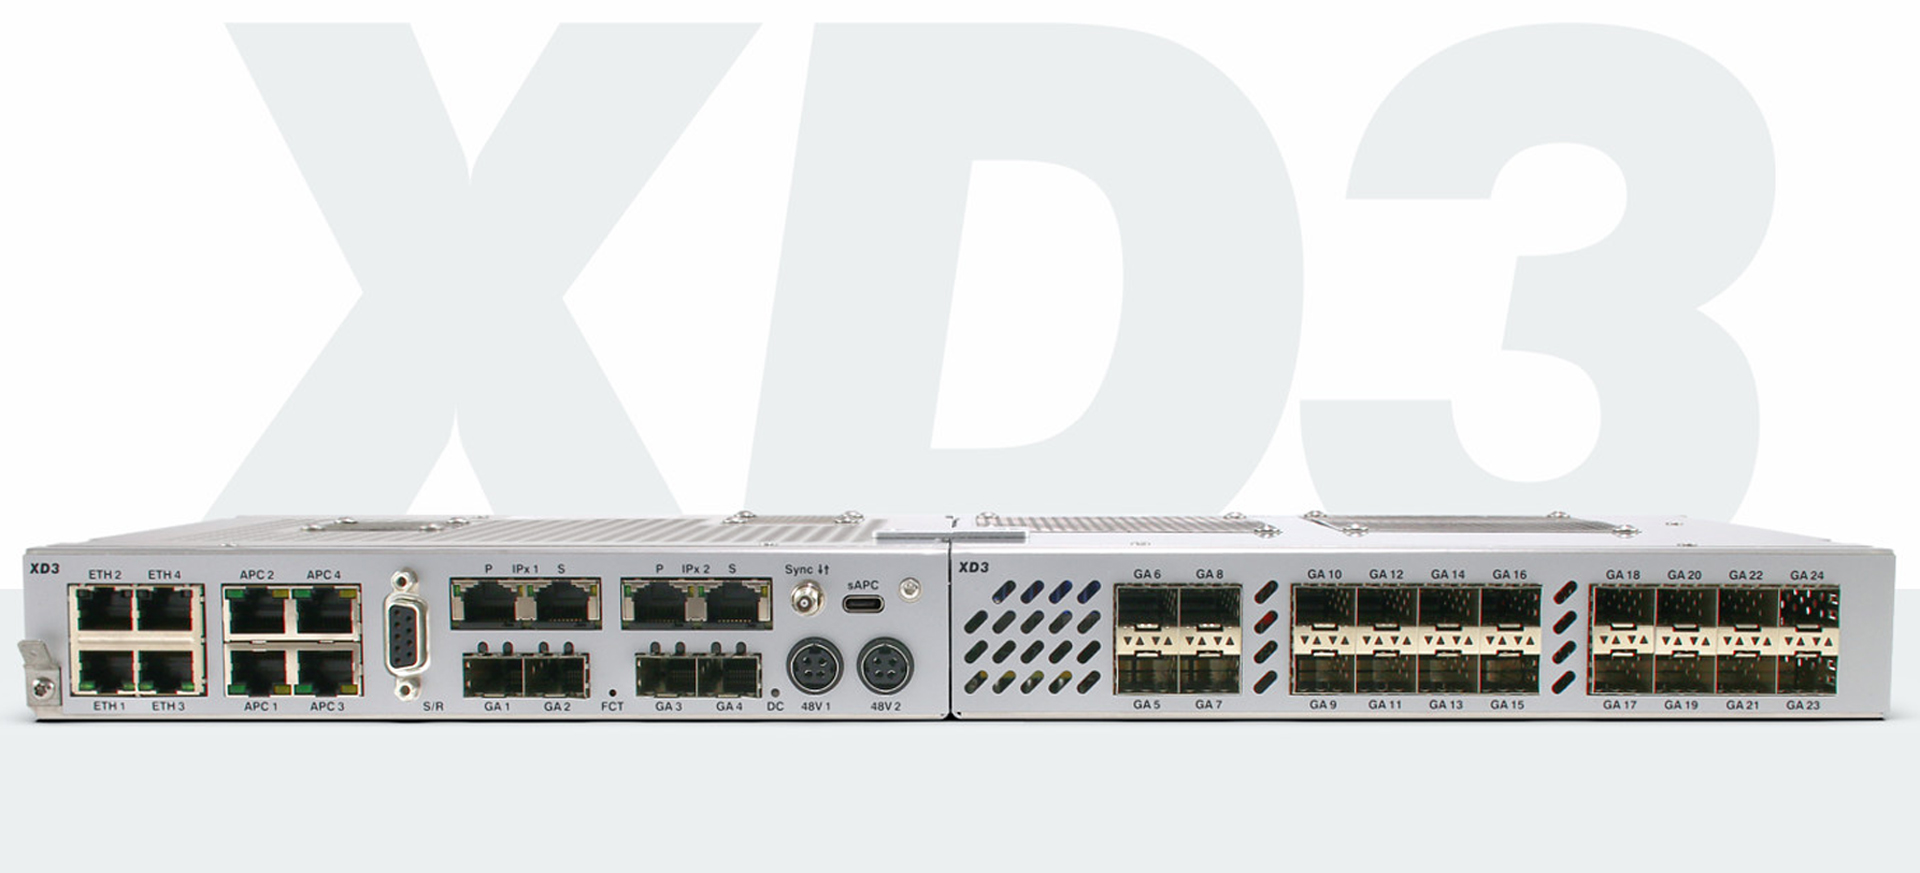 XS3 IP Core and XD3 IP Core audio processors to make UK market debut